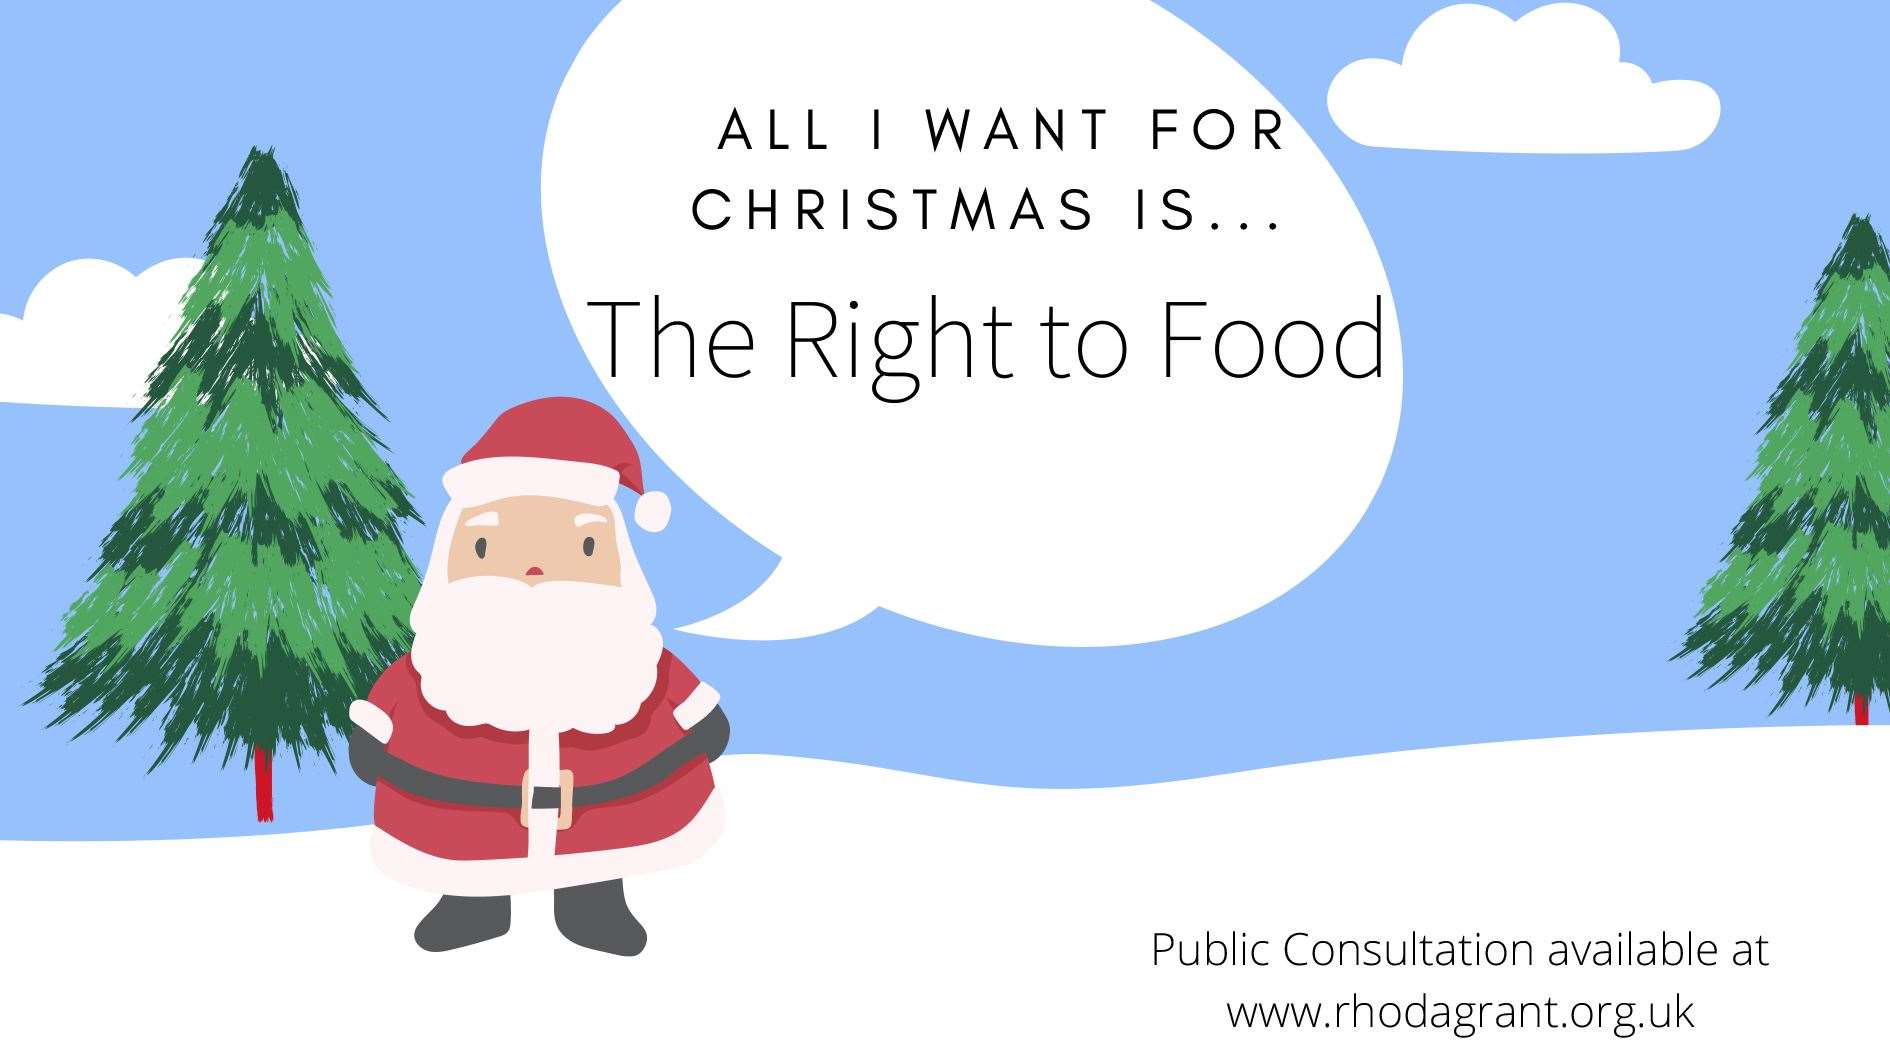 Labour MSP Rhoda Grant is highlighting her consultation on proposals to include a Right to Food in Scot’s Law.